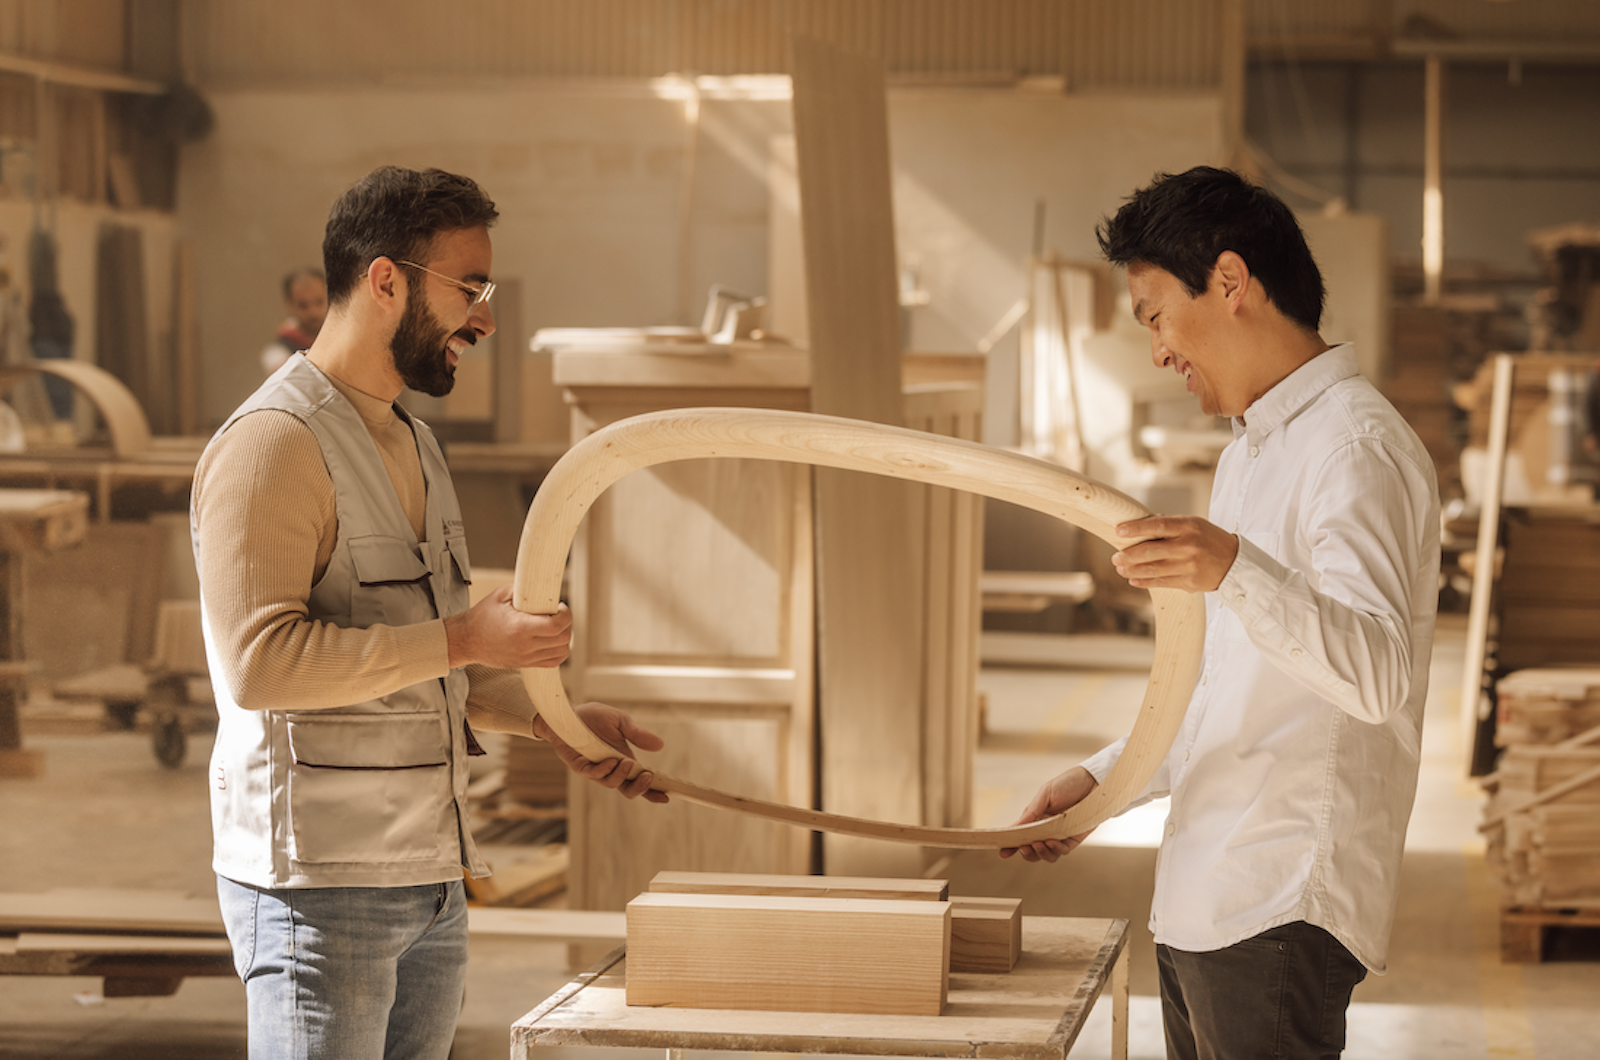 Designer Gabriel Tan (right) moved his family to Porto to work with local artisans.